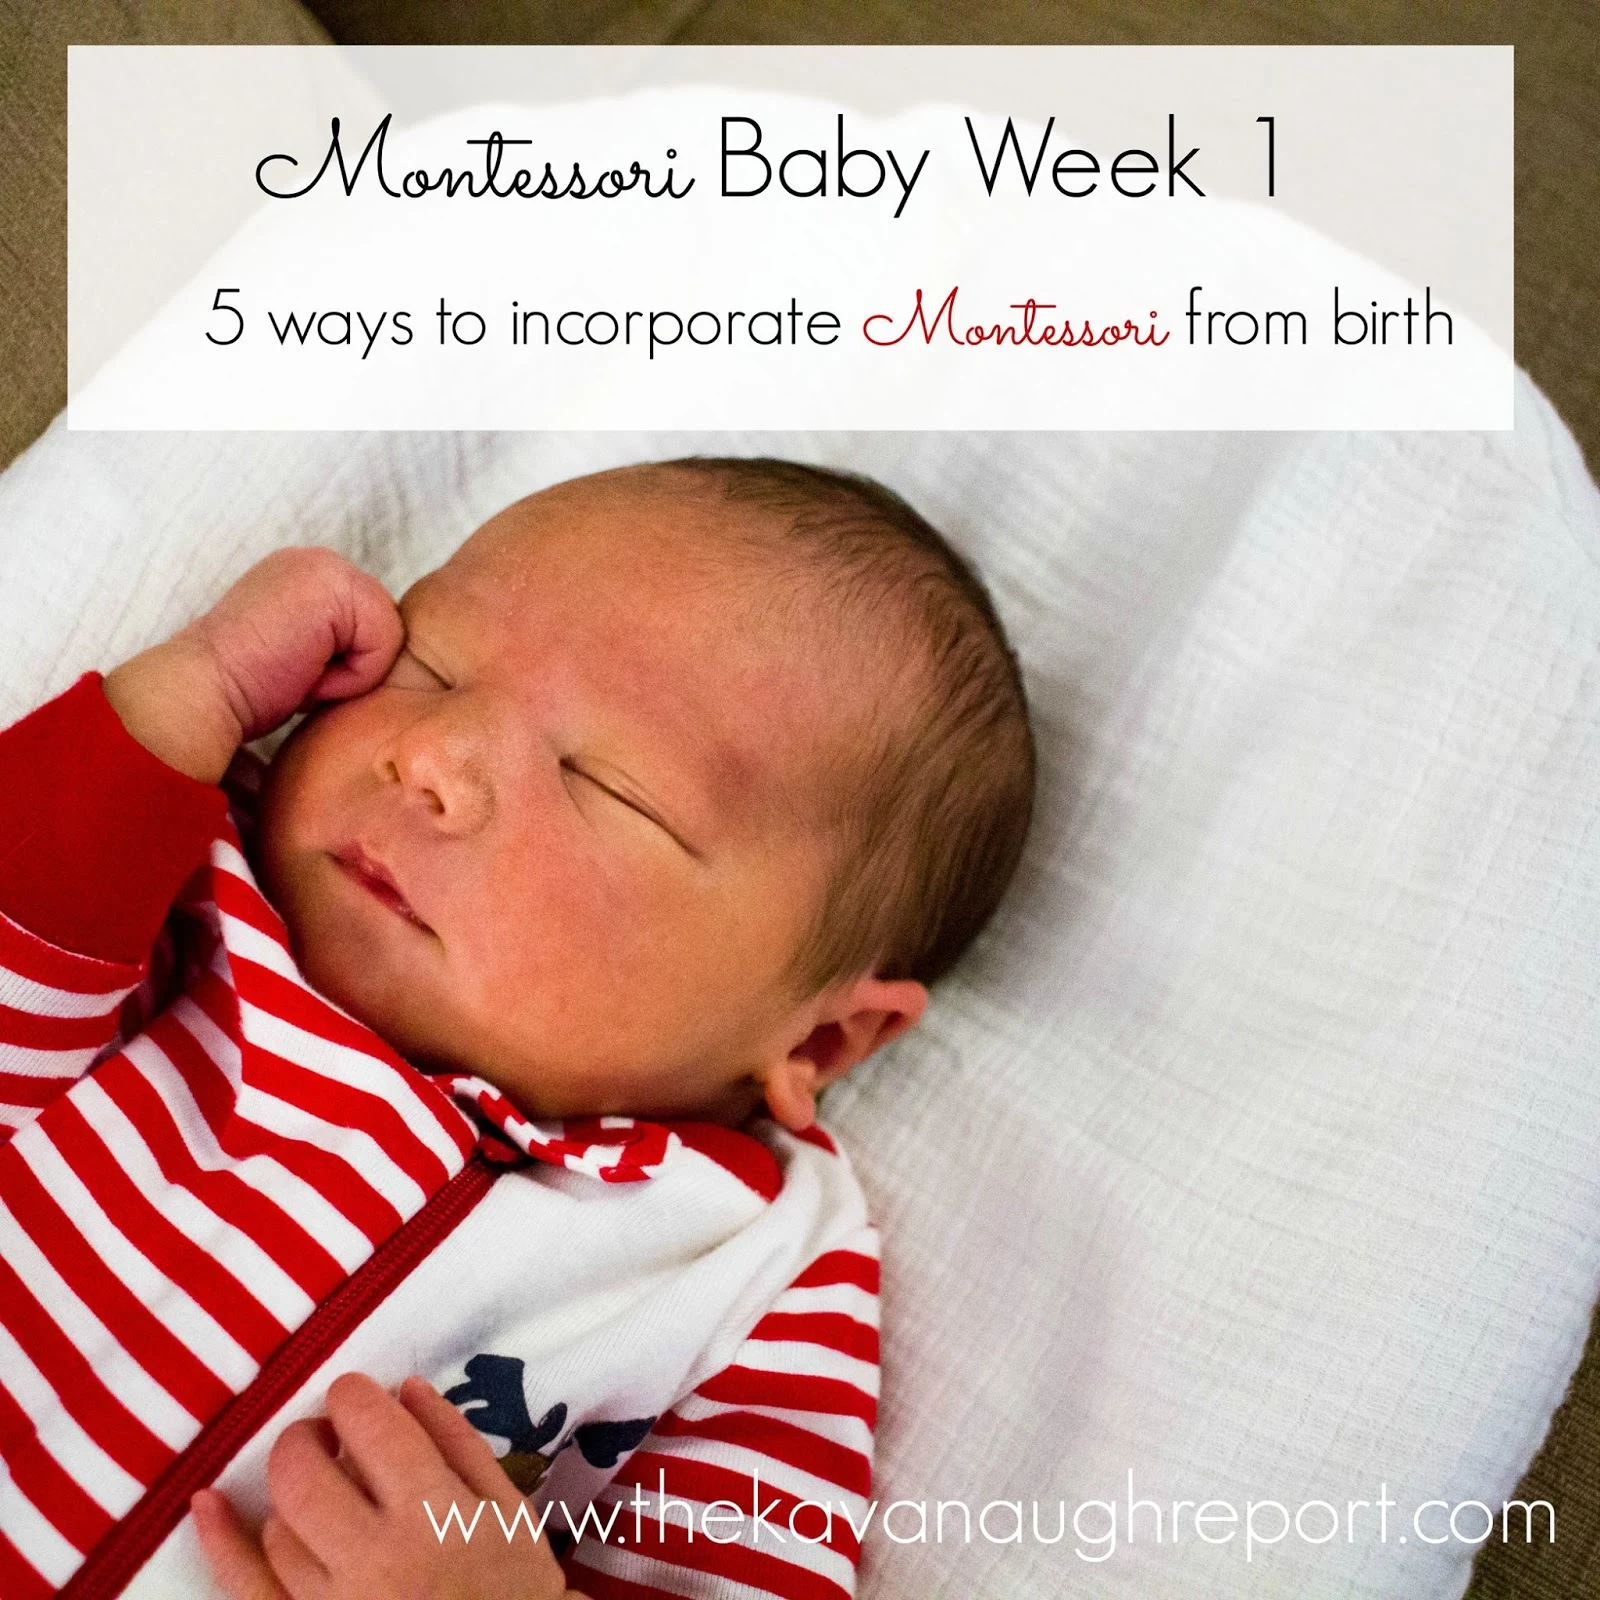 Montessori is a lifestyle that can be introduced when a baby is born! Here are 5 ways to incorporate Montessori from birth. 